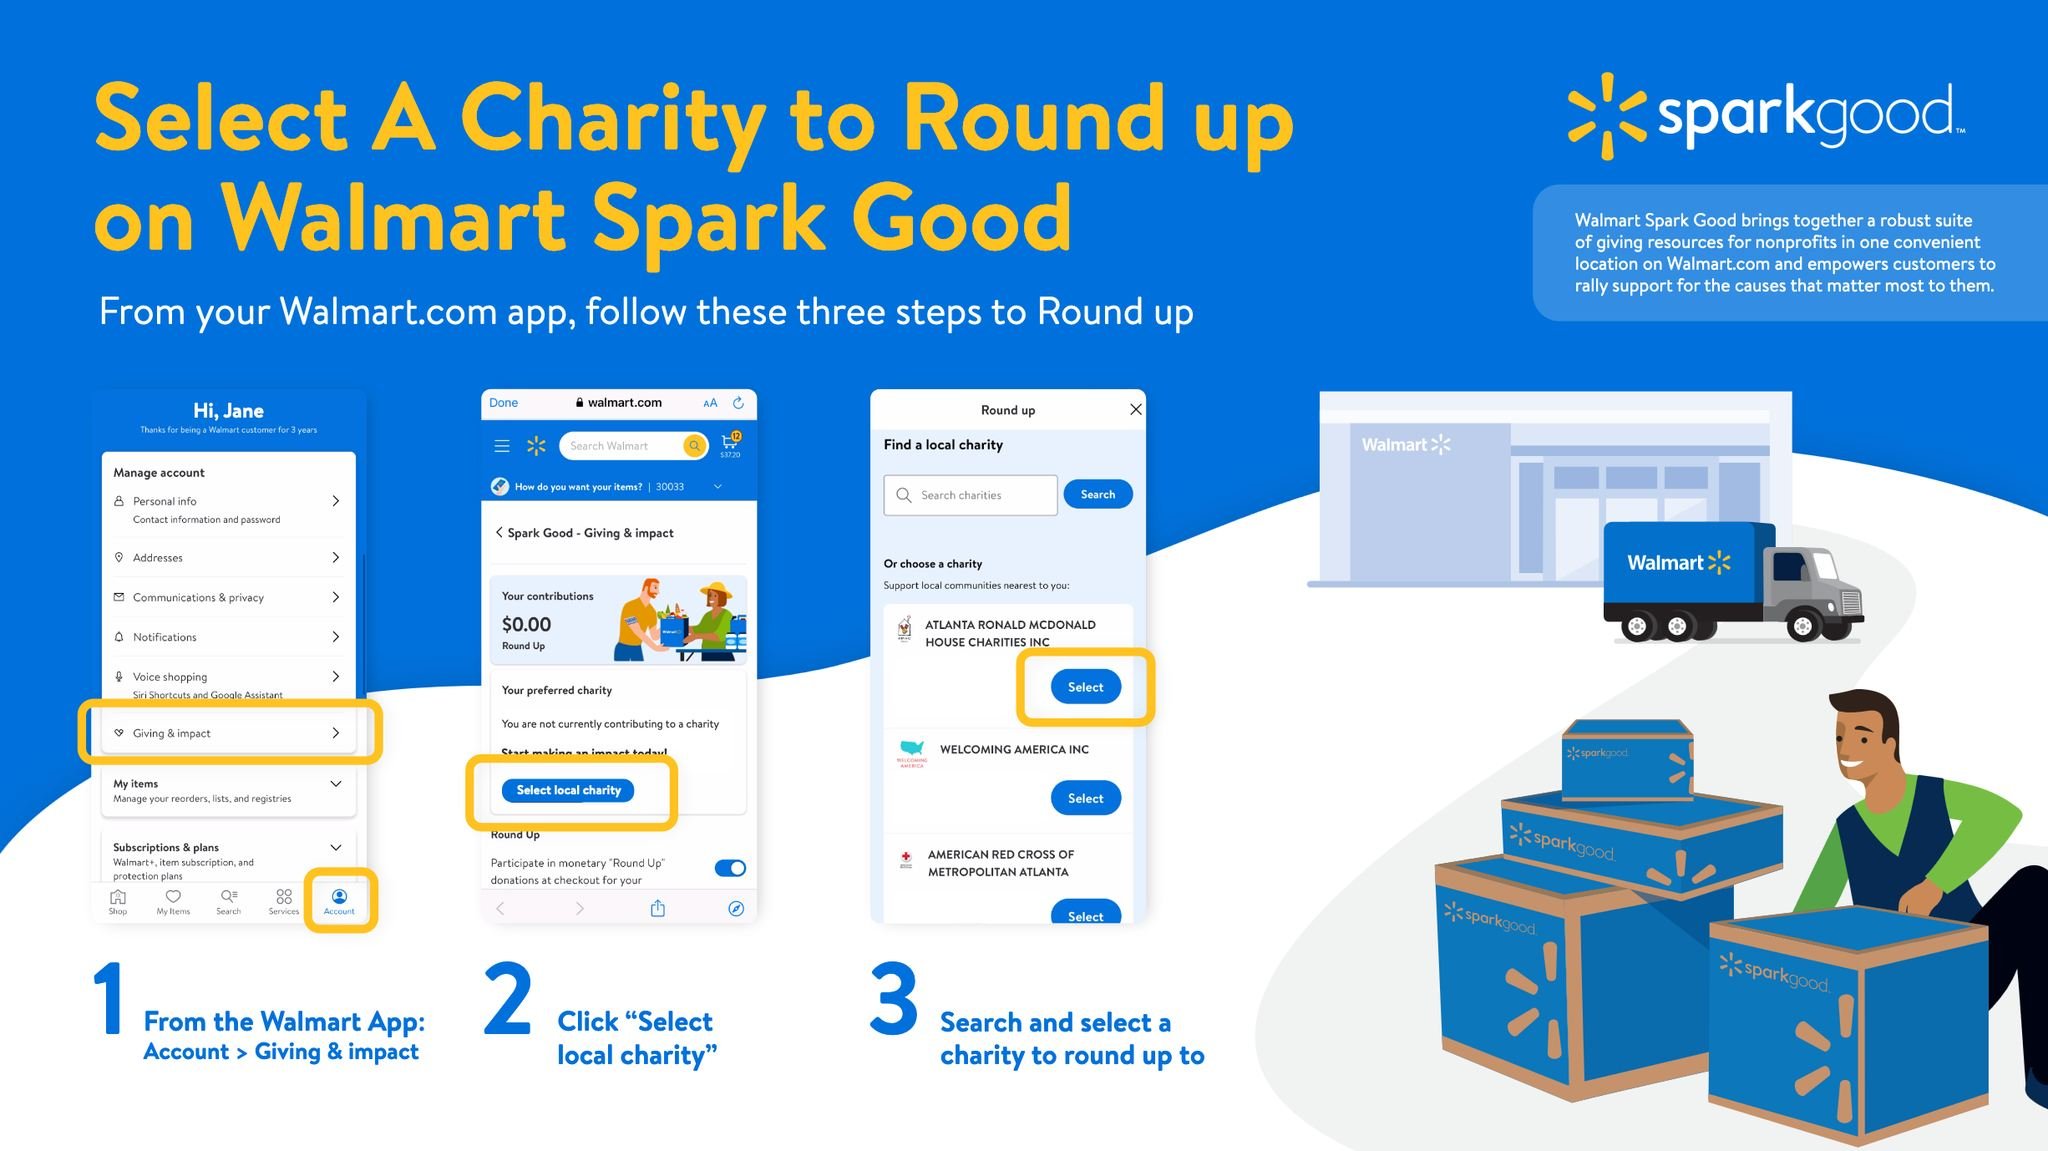 Follow these easy steps to donate when shopping at Walmart!